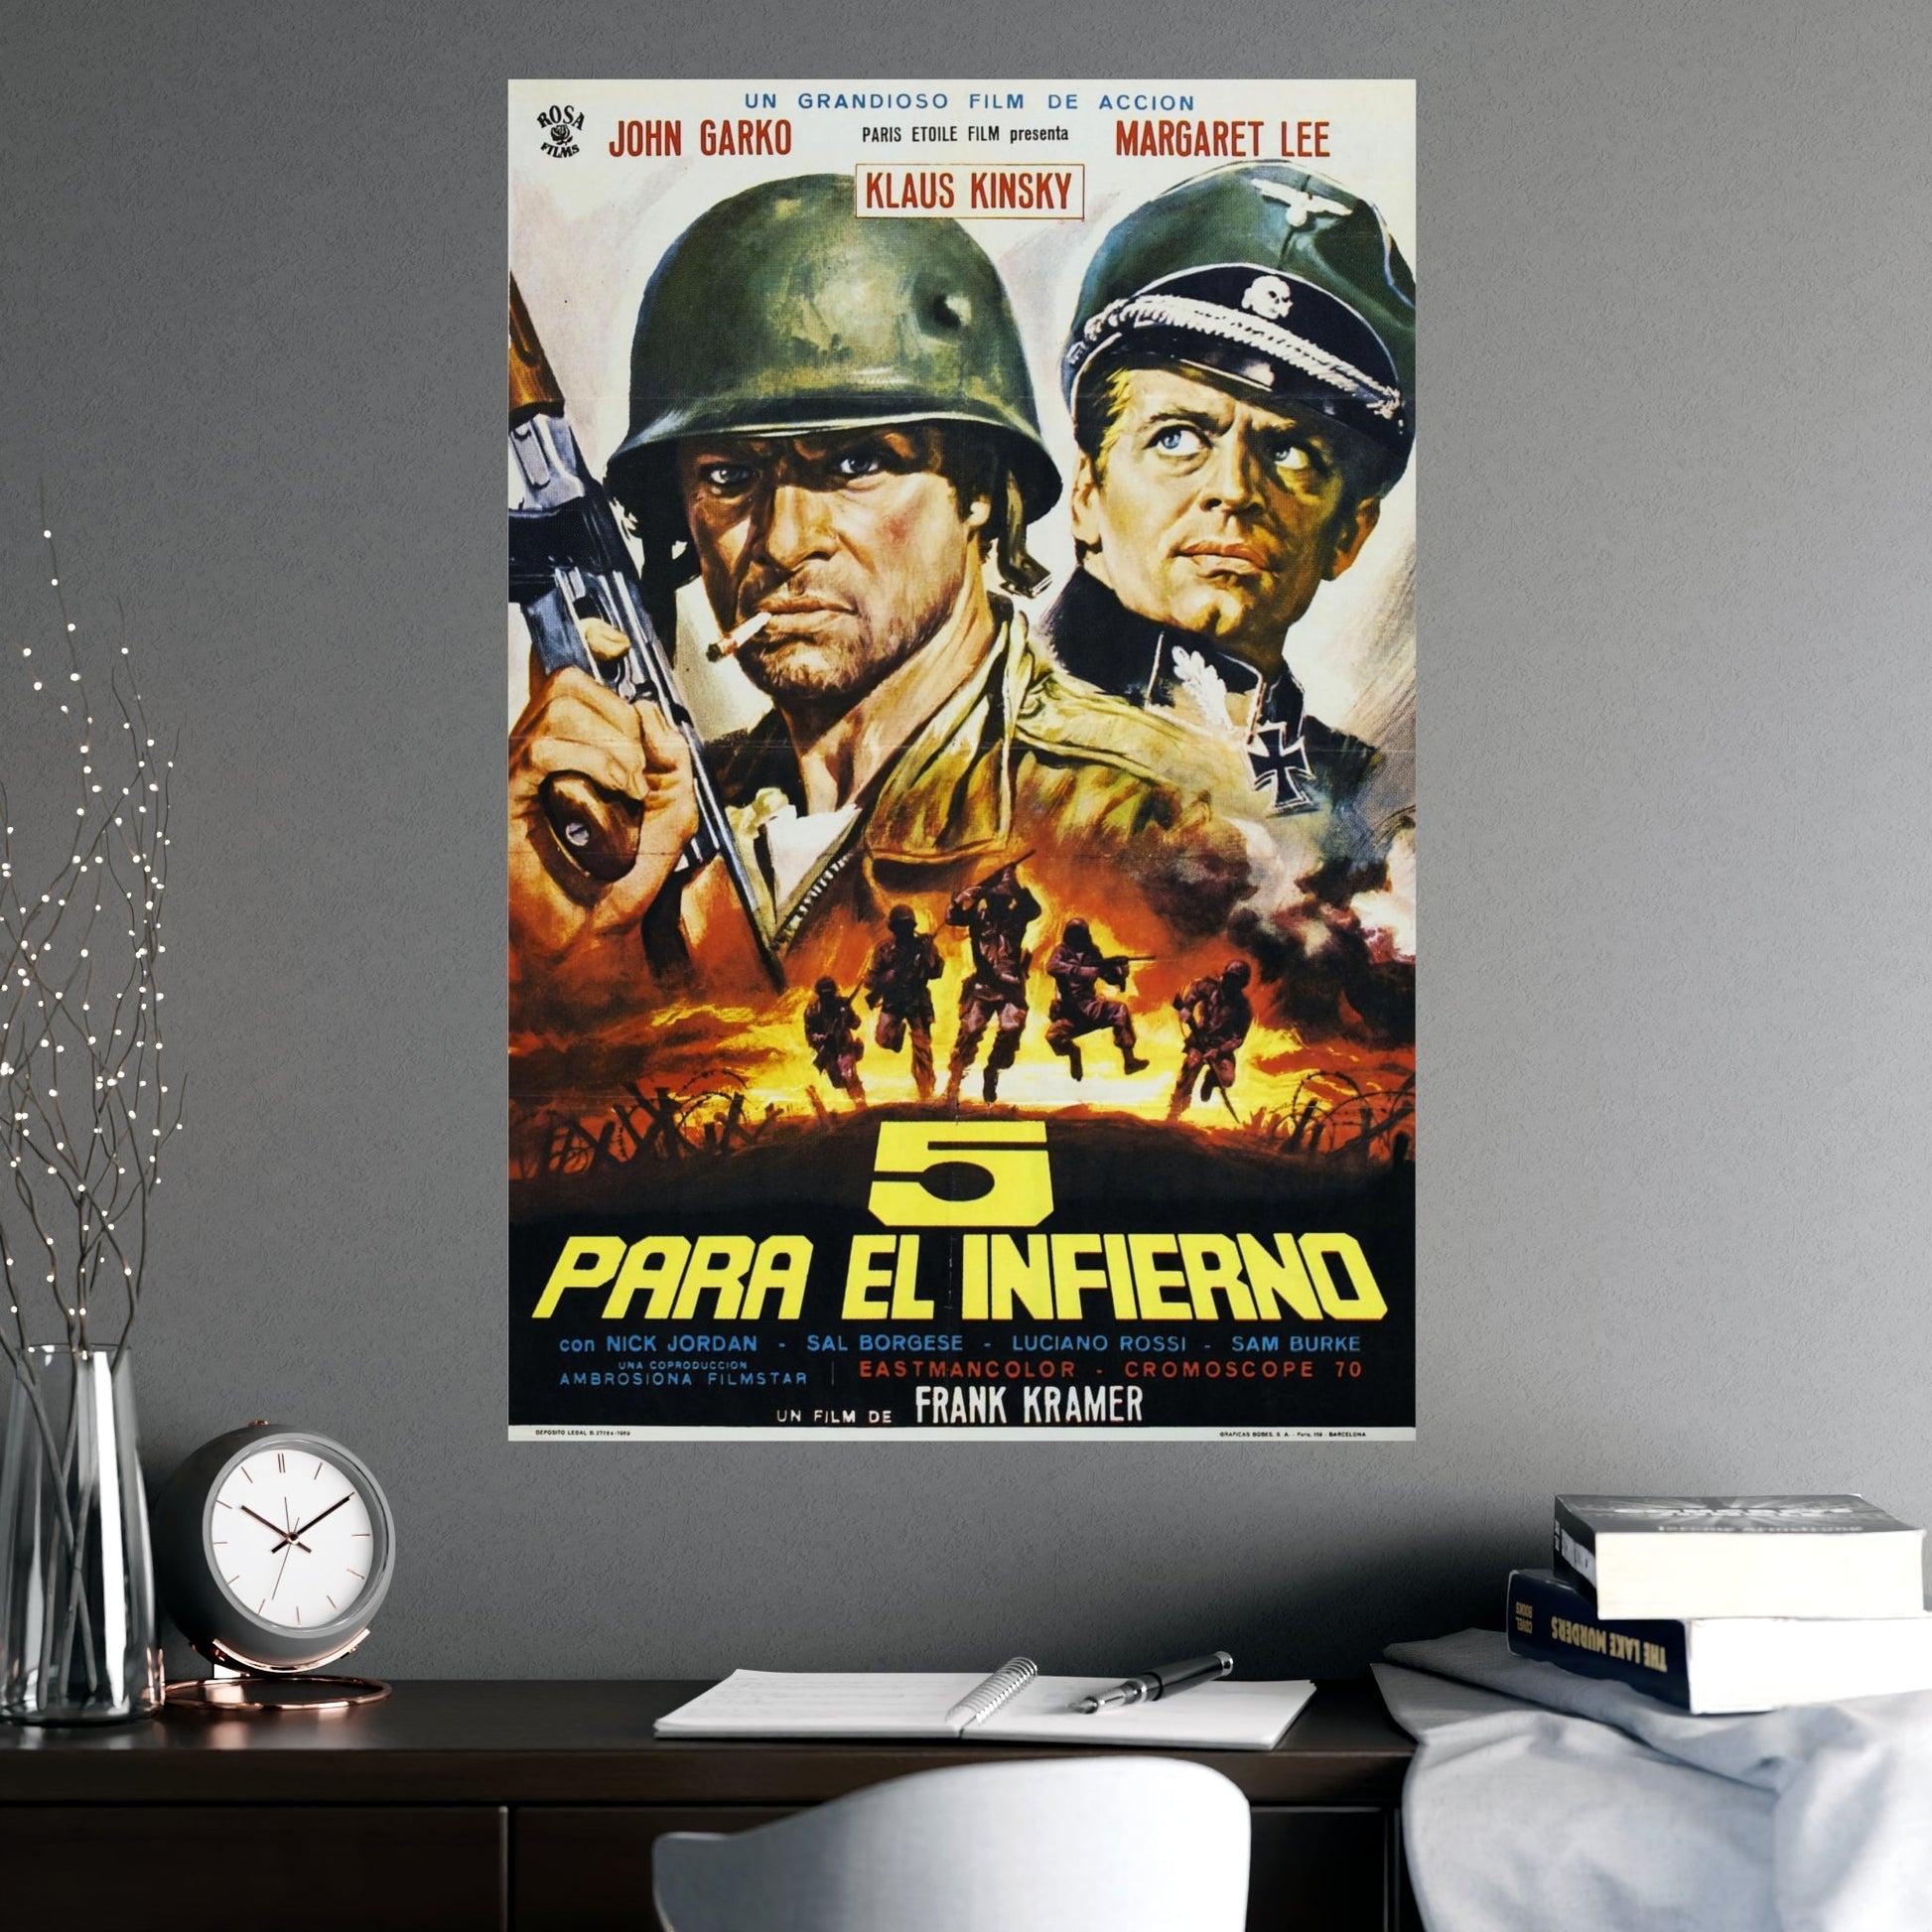 5 FOR HELL 1969 - Paper Movie Poster-The Sticker Space